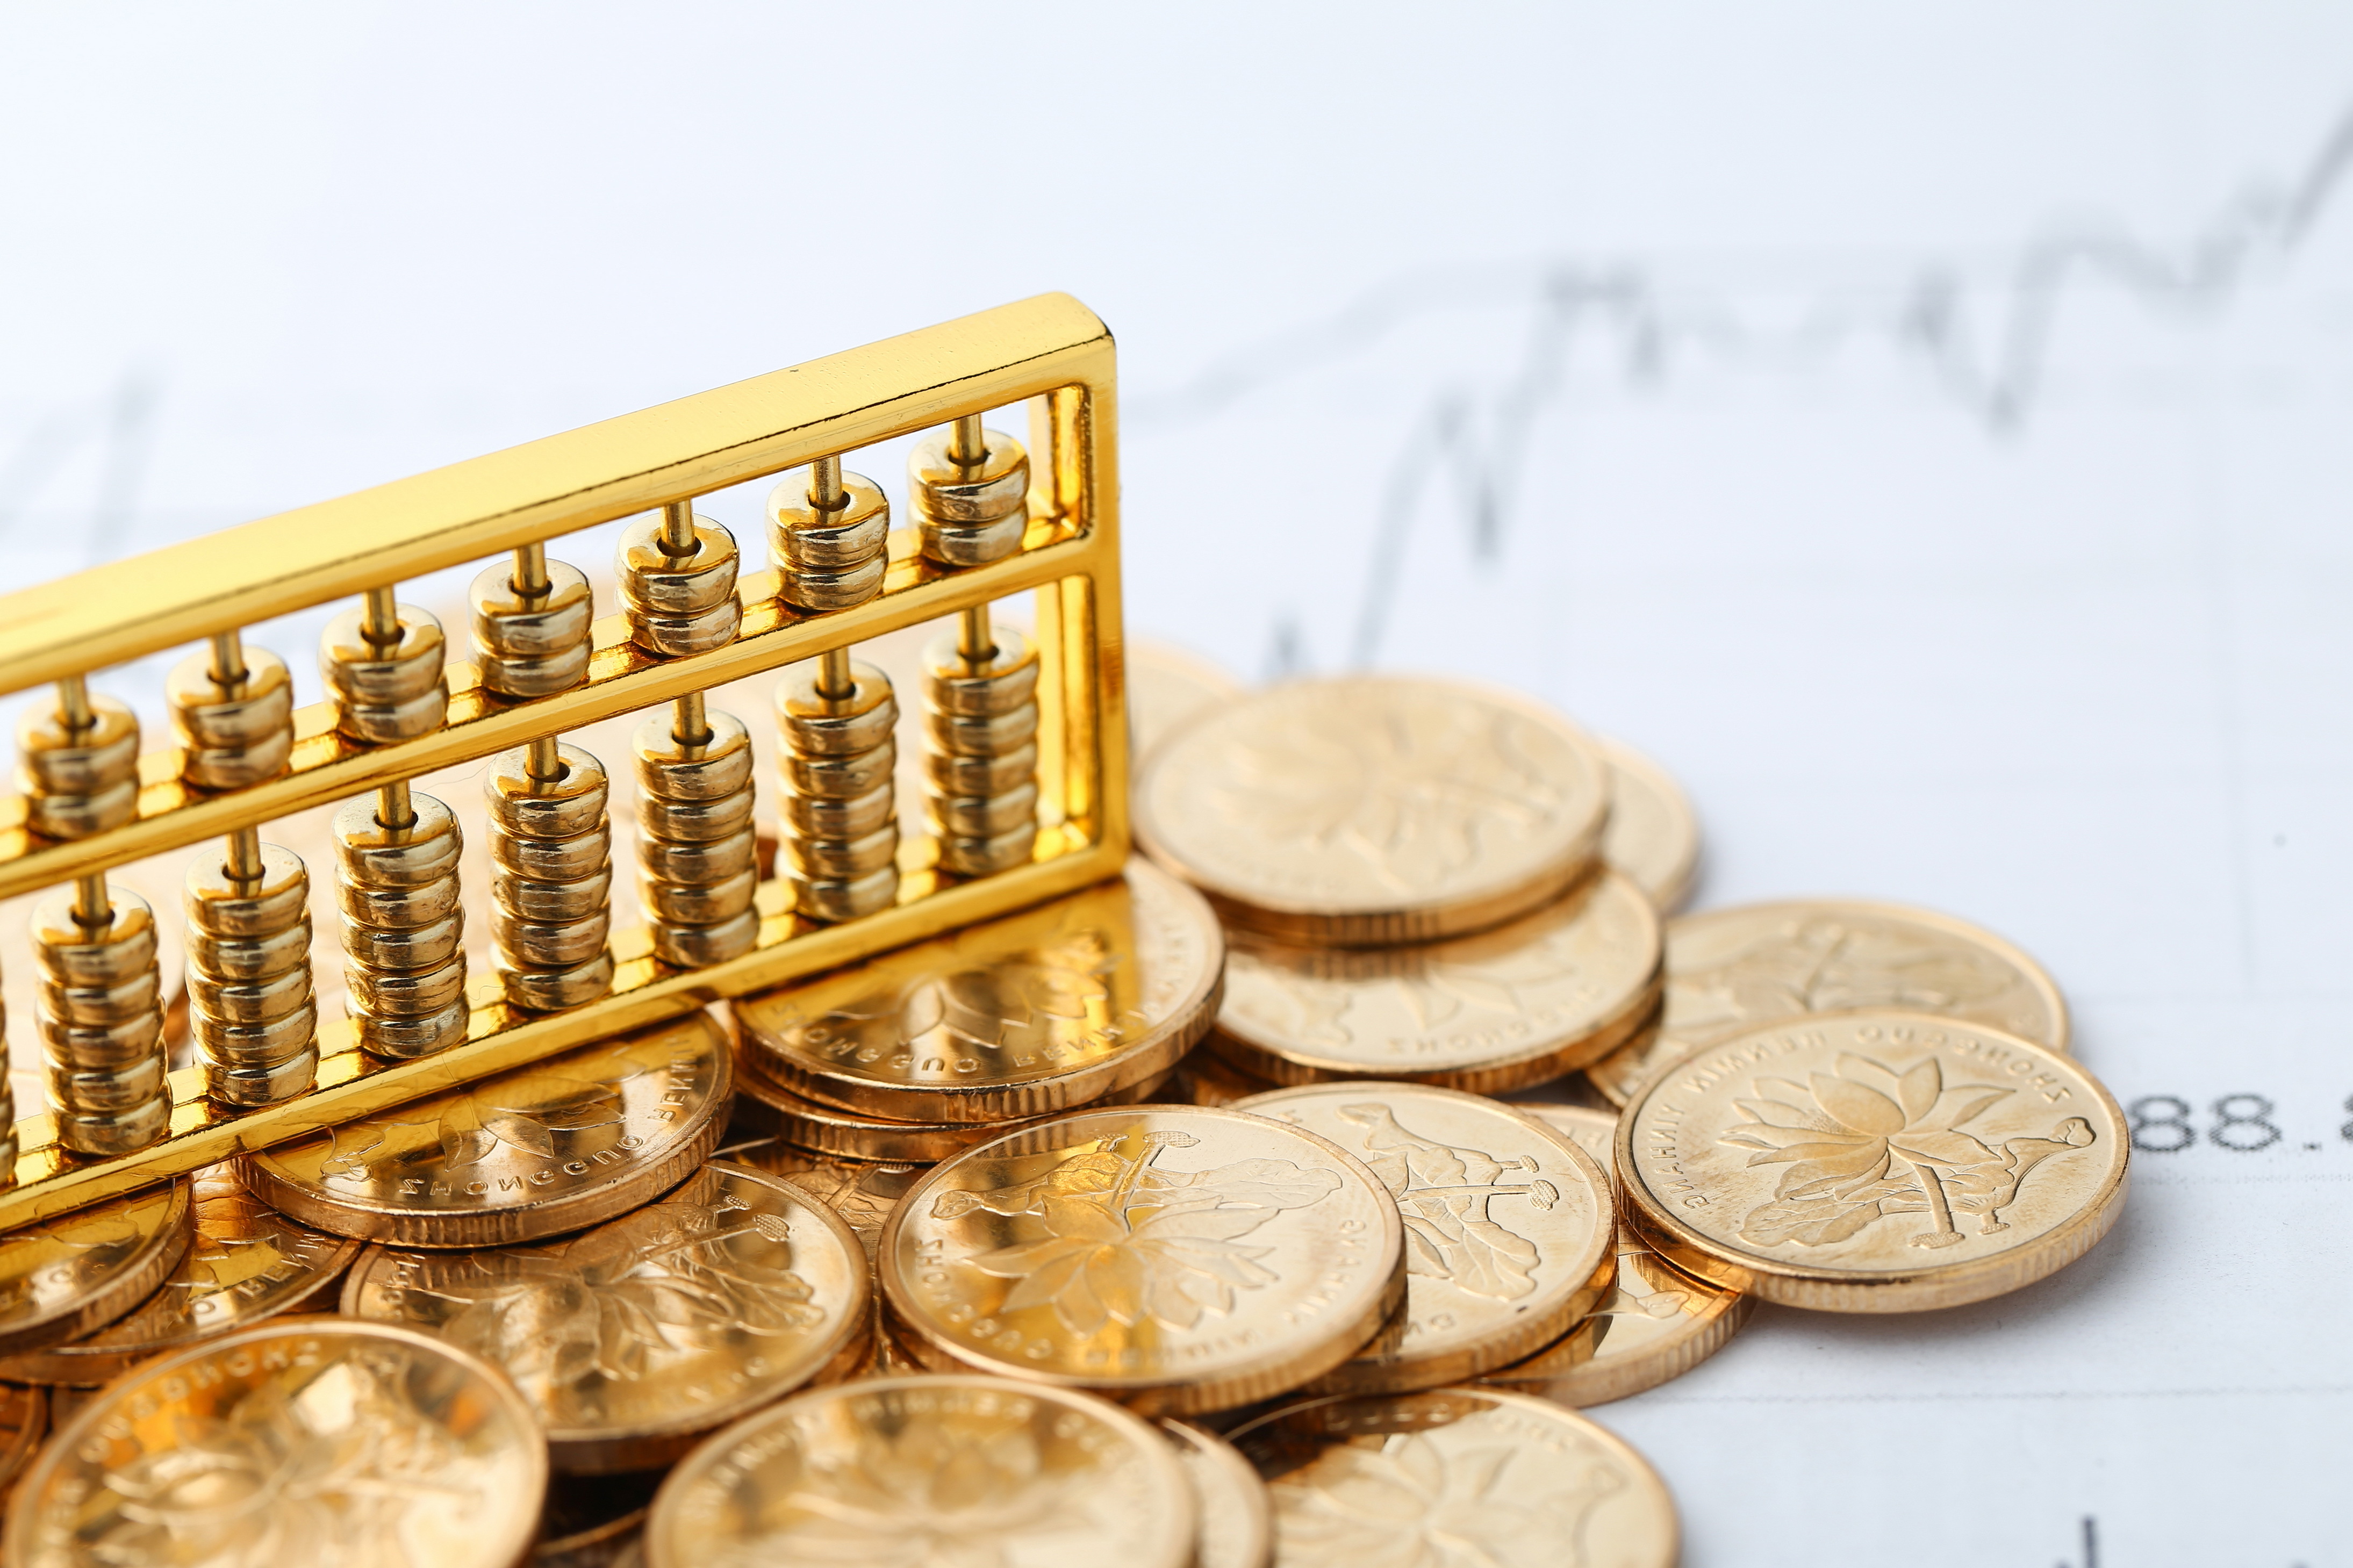 https://img.moneyduck.com/article_attachment/1685684761-golden-abacus-with-chinese-rmb-gold-coins-as-background%20%281%29.jpg